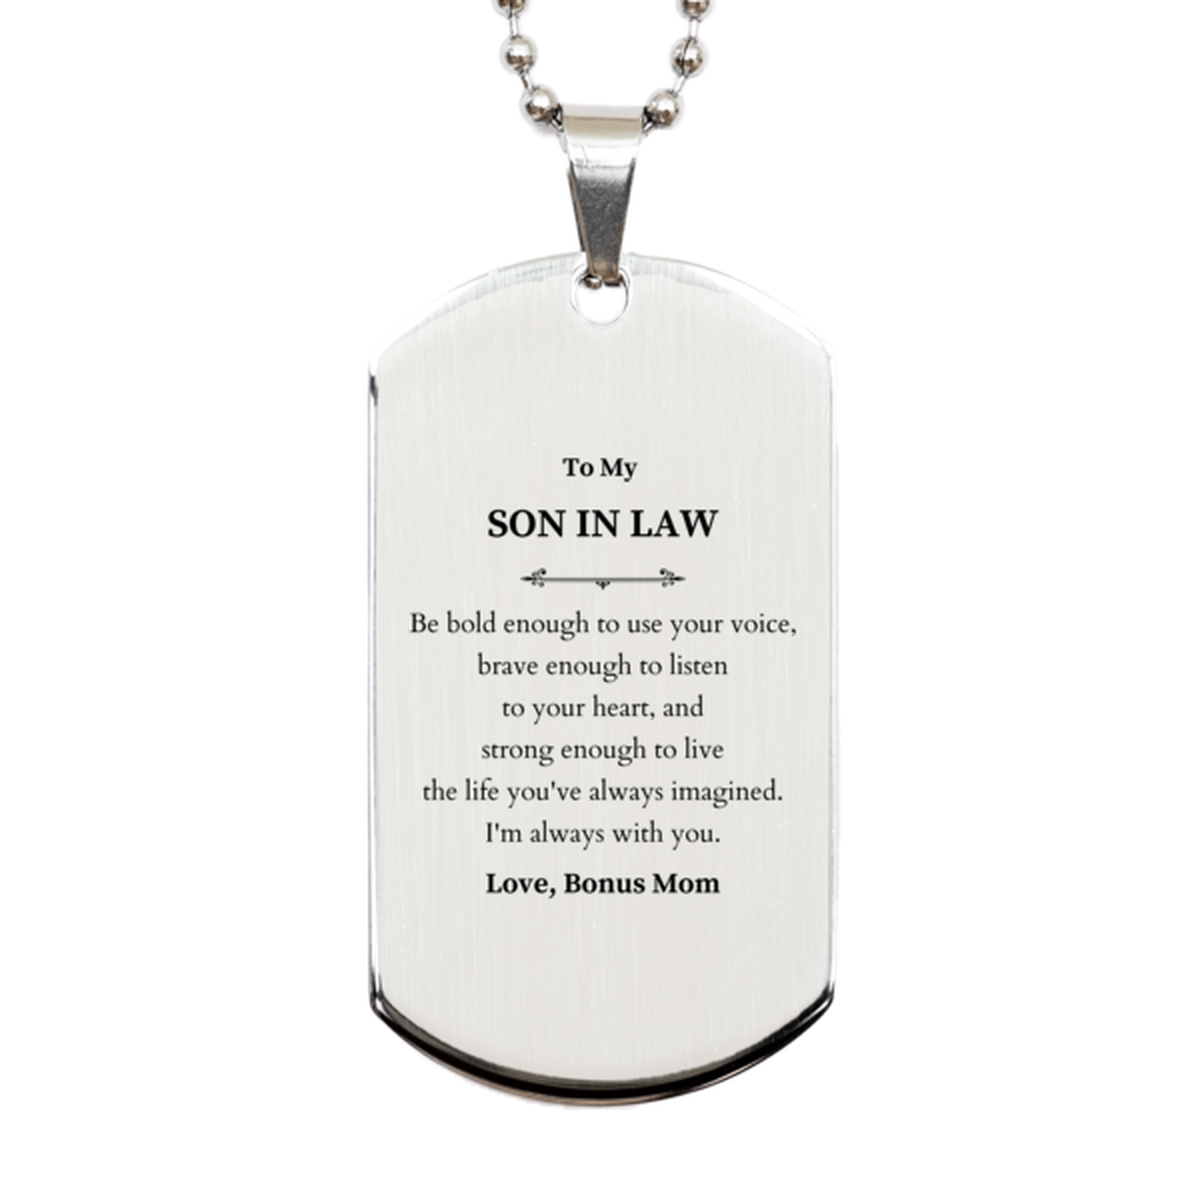 Keepsake Son In Law Silver Dog Tag Gift Idea Graduation Christmas Birthday Son In Law from Bonus Mom, Son In Law Be bold enough to use your voice, brave enough to listen to your heart. Love, Bonus Mom